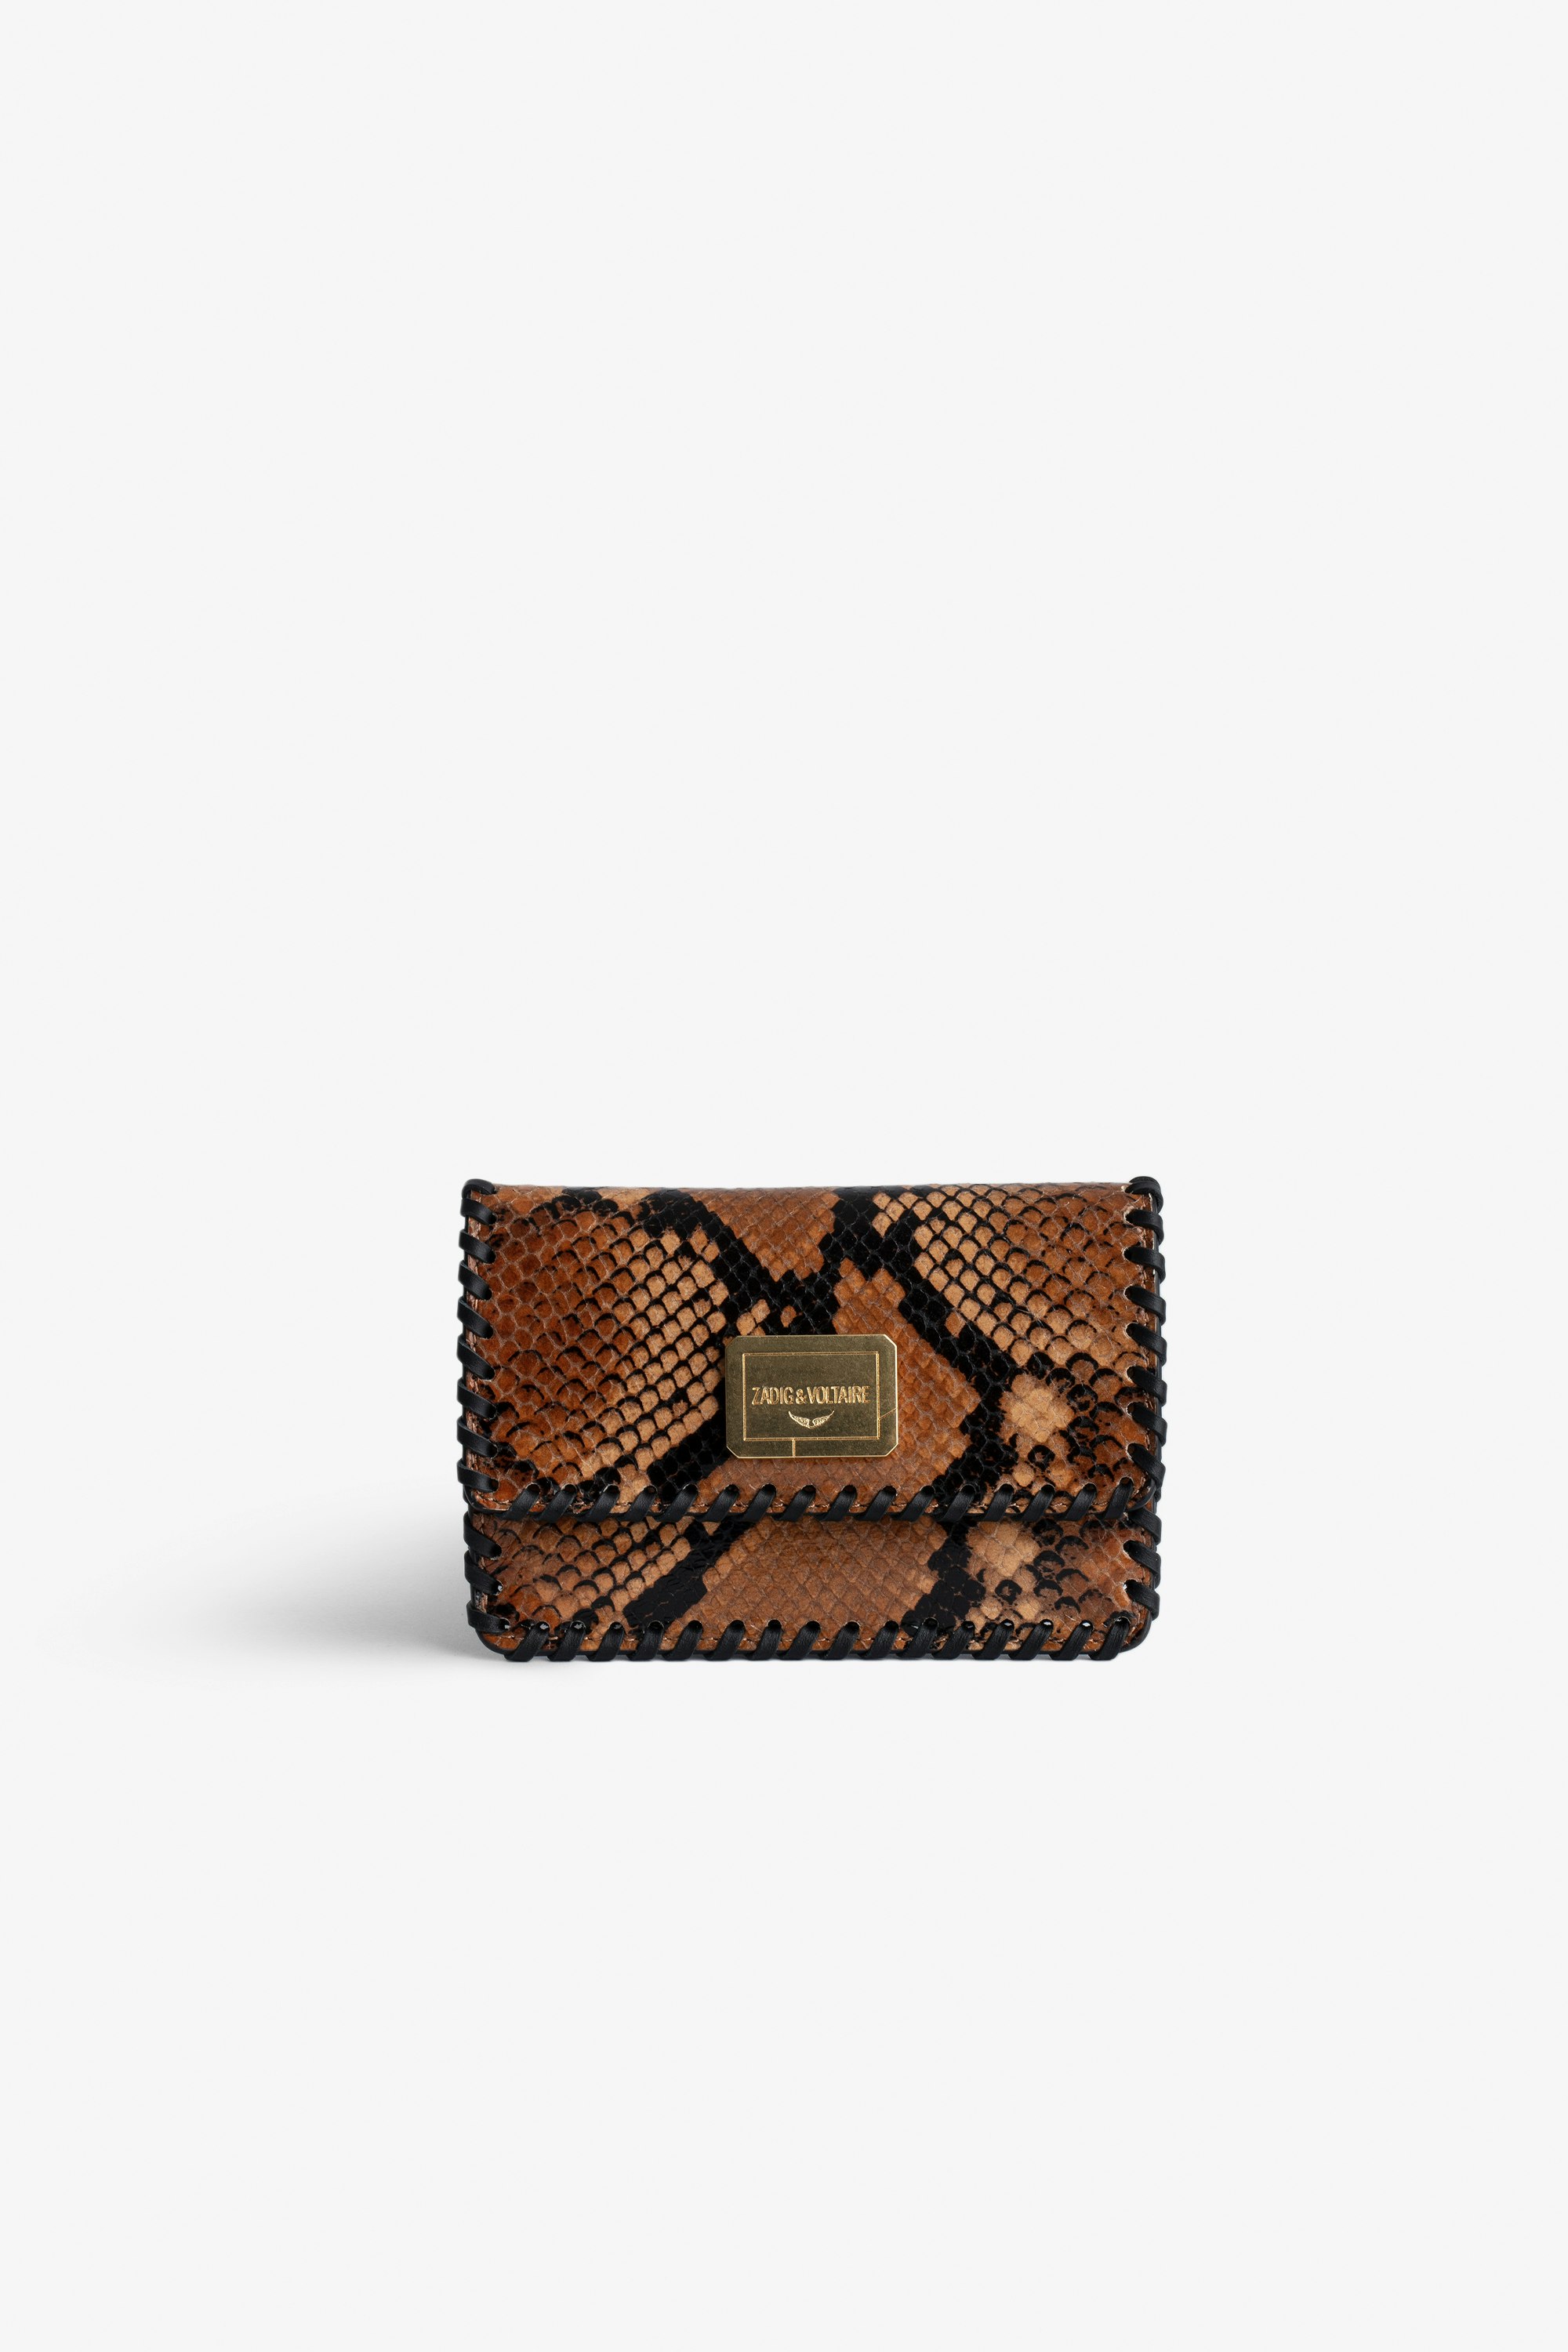 Le Cecilia Wallet Women’s wallet in brown python-effect leather wallet with a ZV gold-tone clasp and braided edges